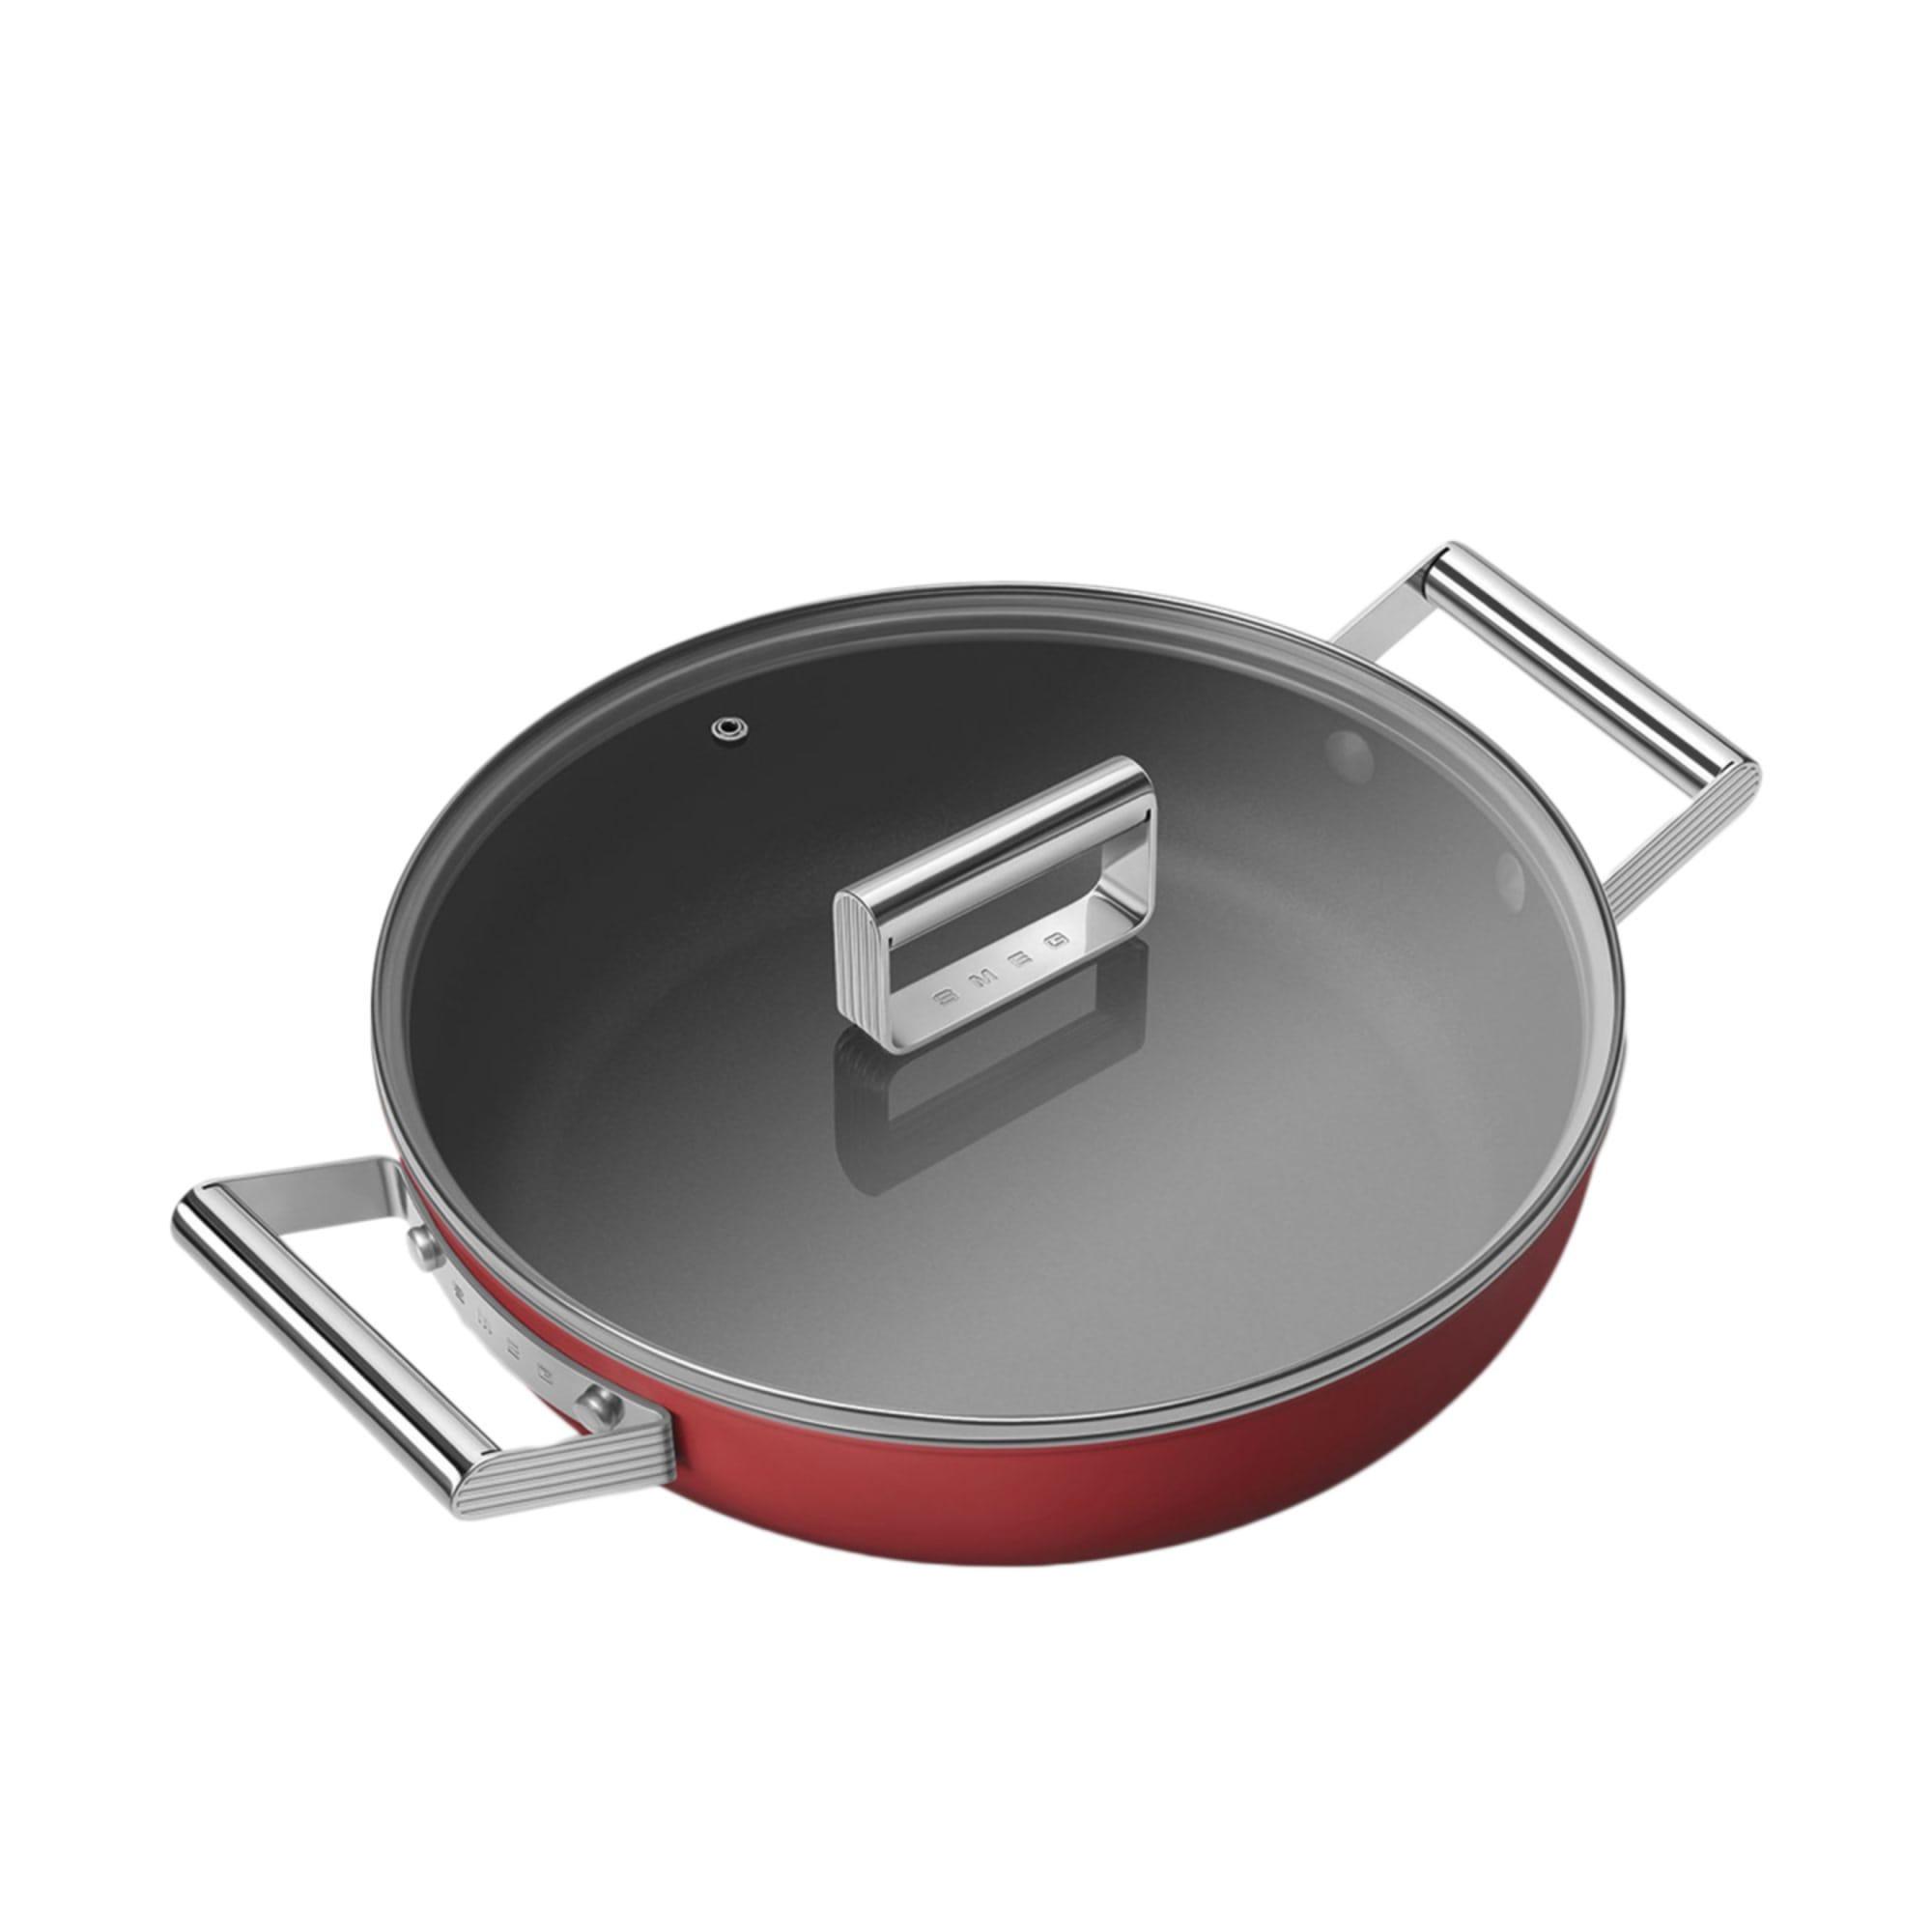 Smeg Non Stick Chef's Pan with Lid 28cm - 3.7L Red Image 7